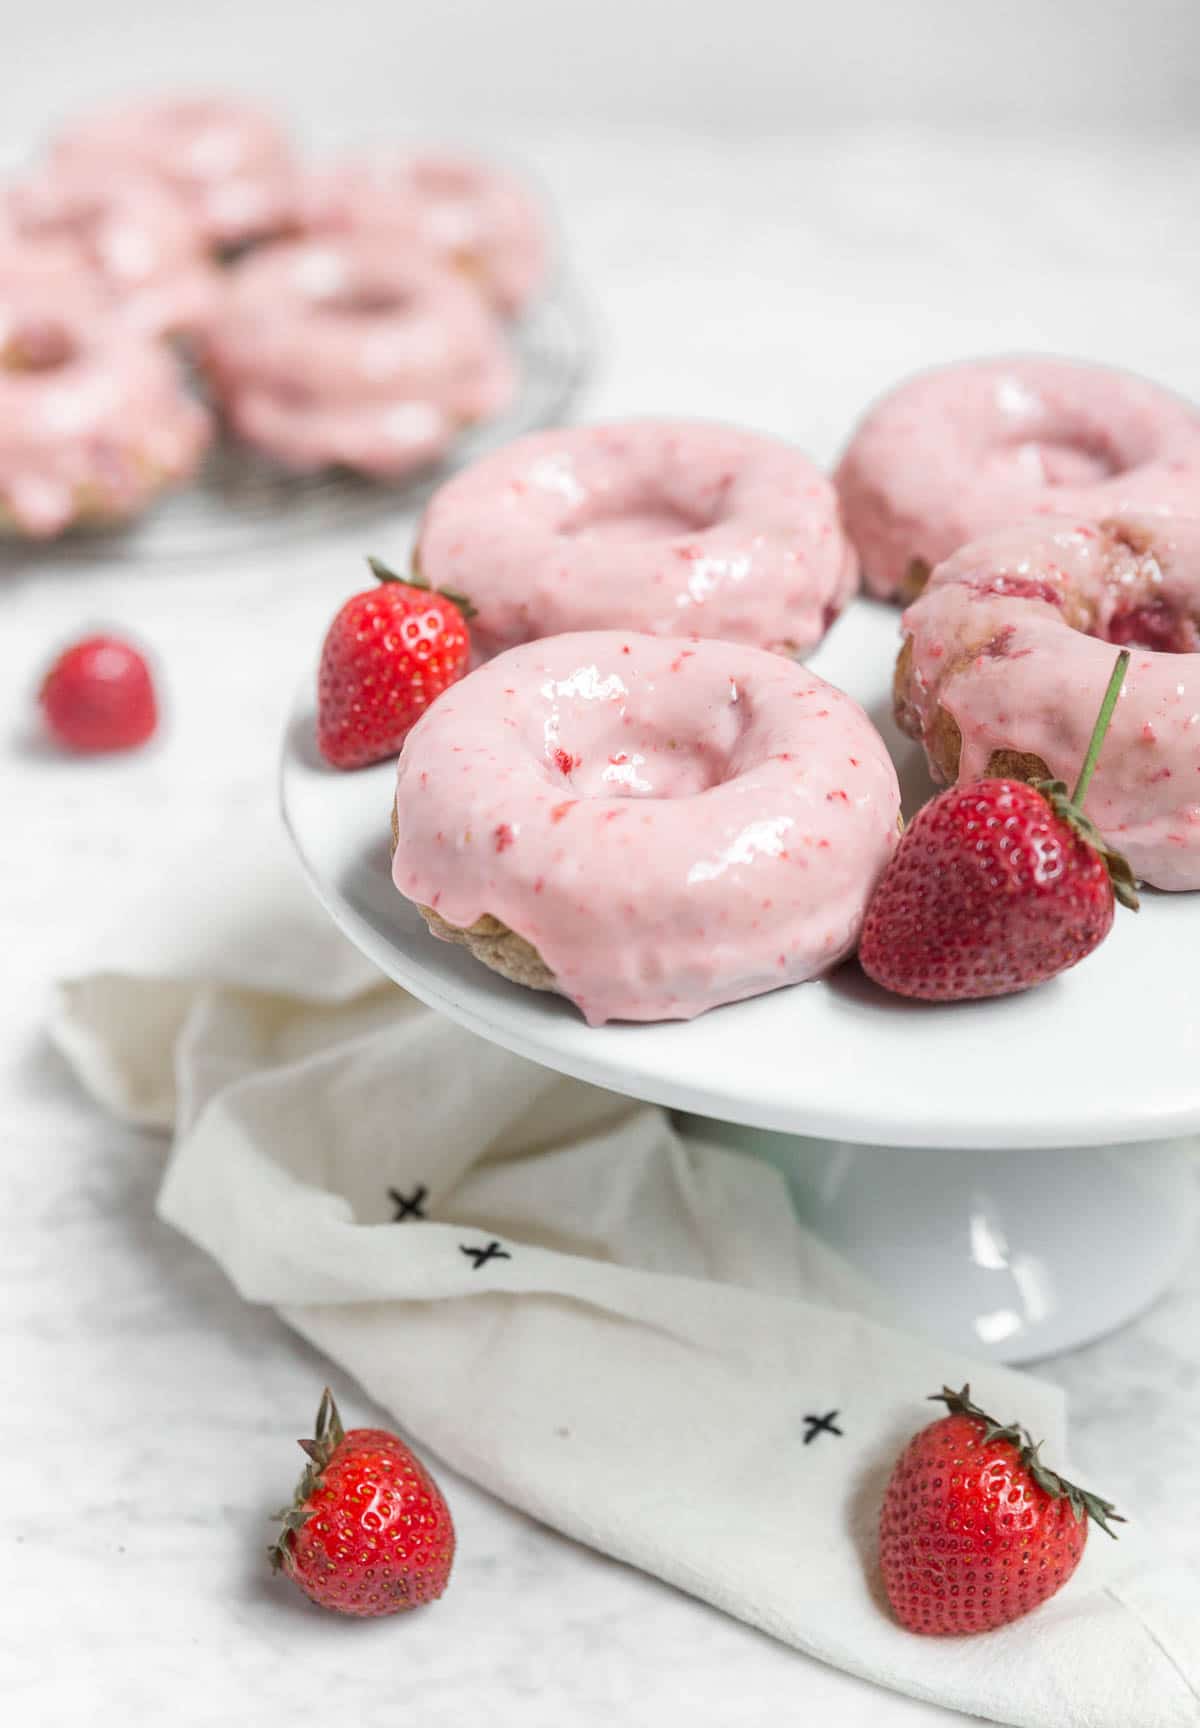 Baked Strawberry Donuts – Gluten-Free and Vegan